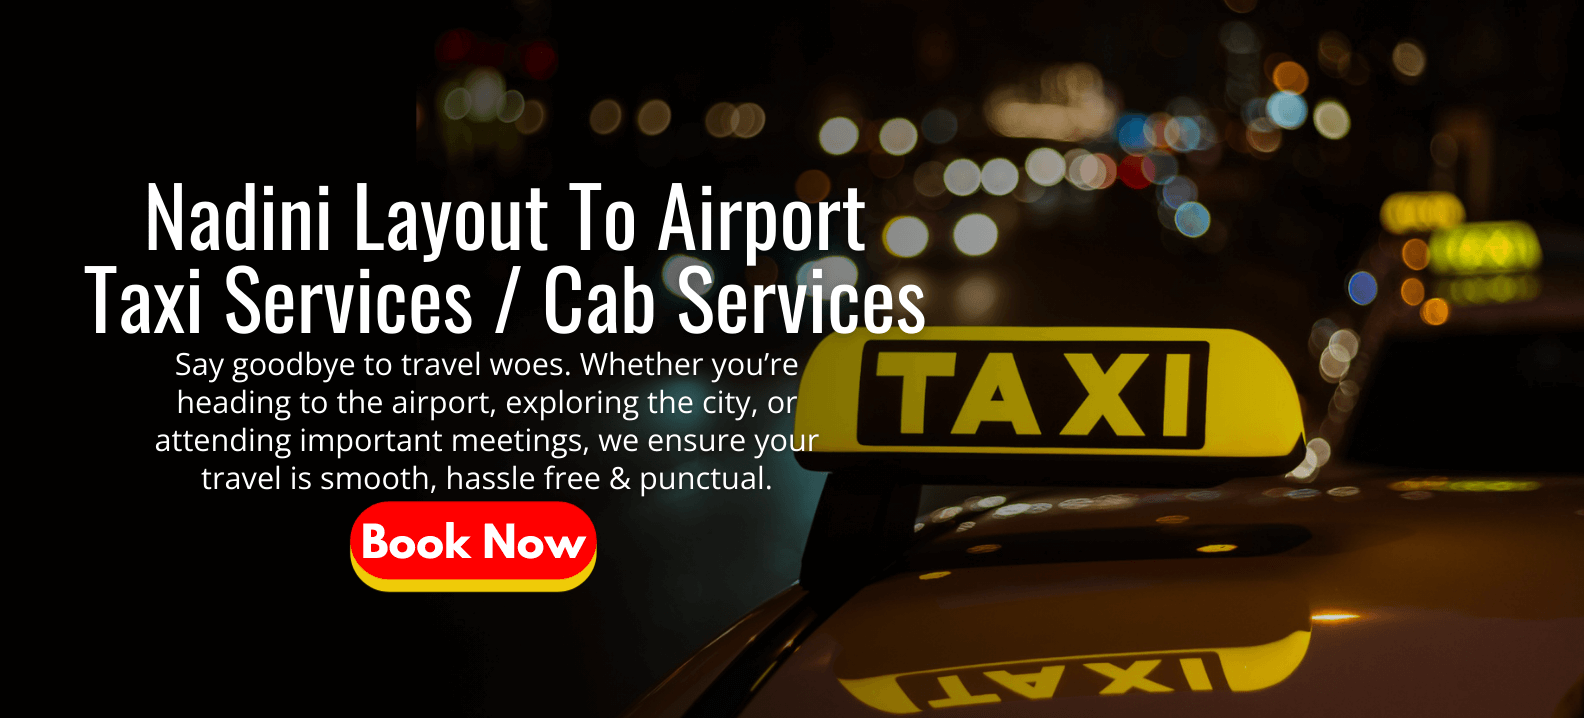 Nandini Layout to Airport Taxi Services | Cab Services